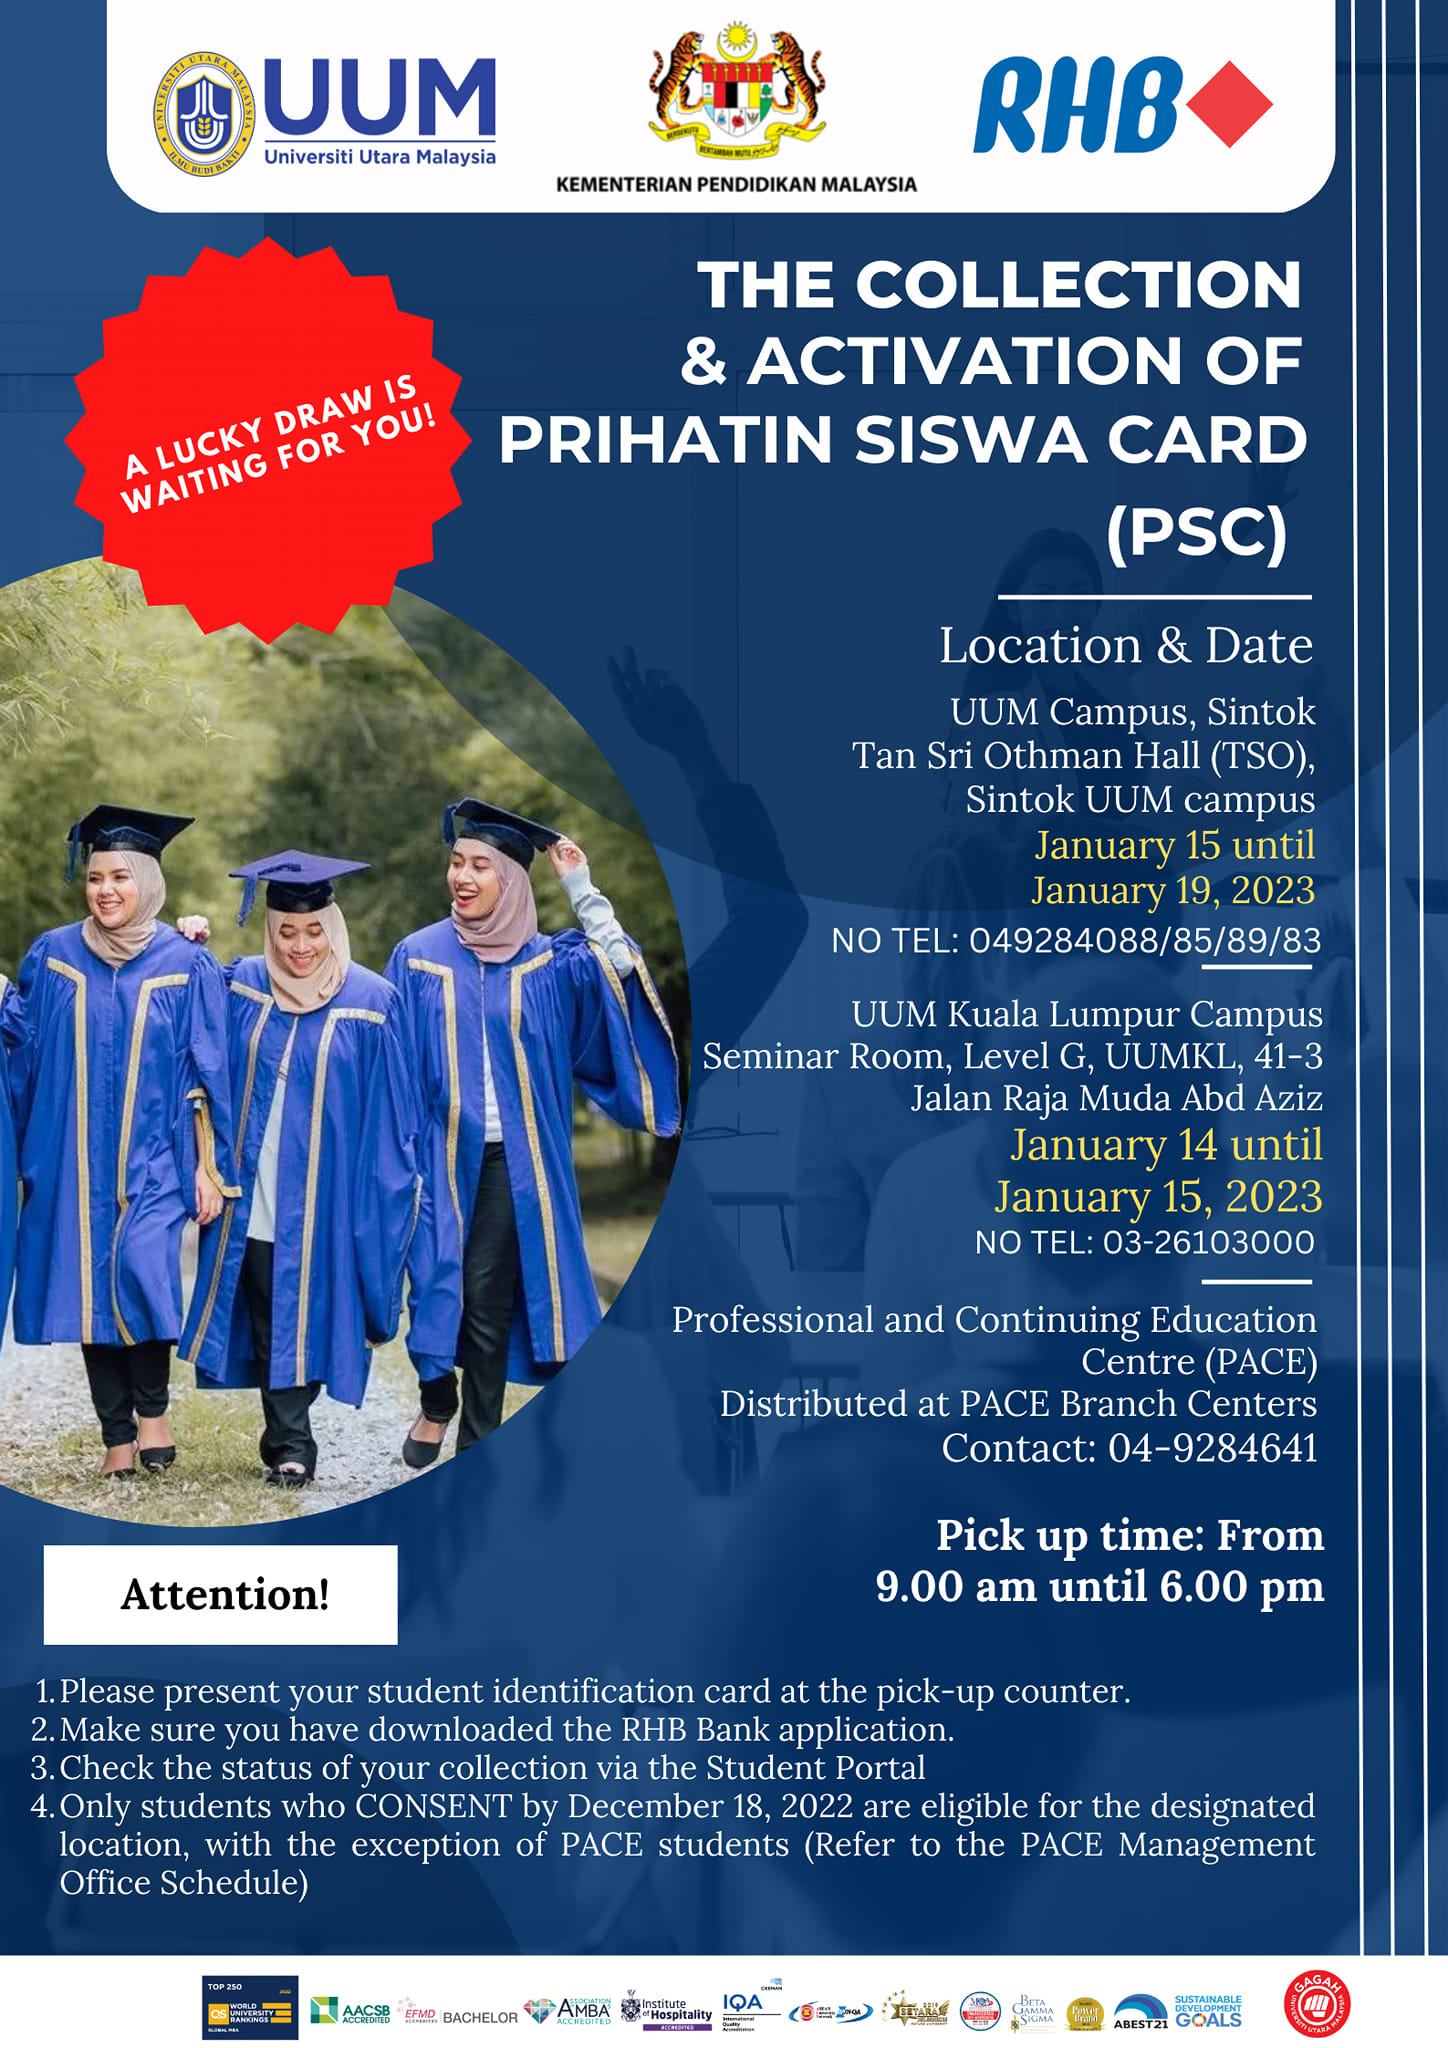 The Collection & Activation of Prihatin Siswa Card (PSC)